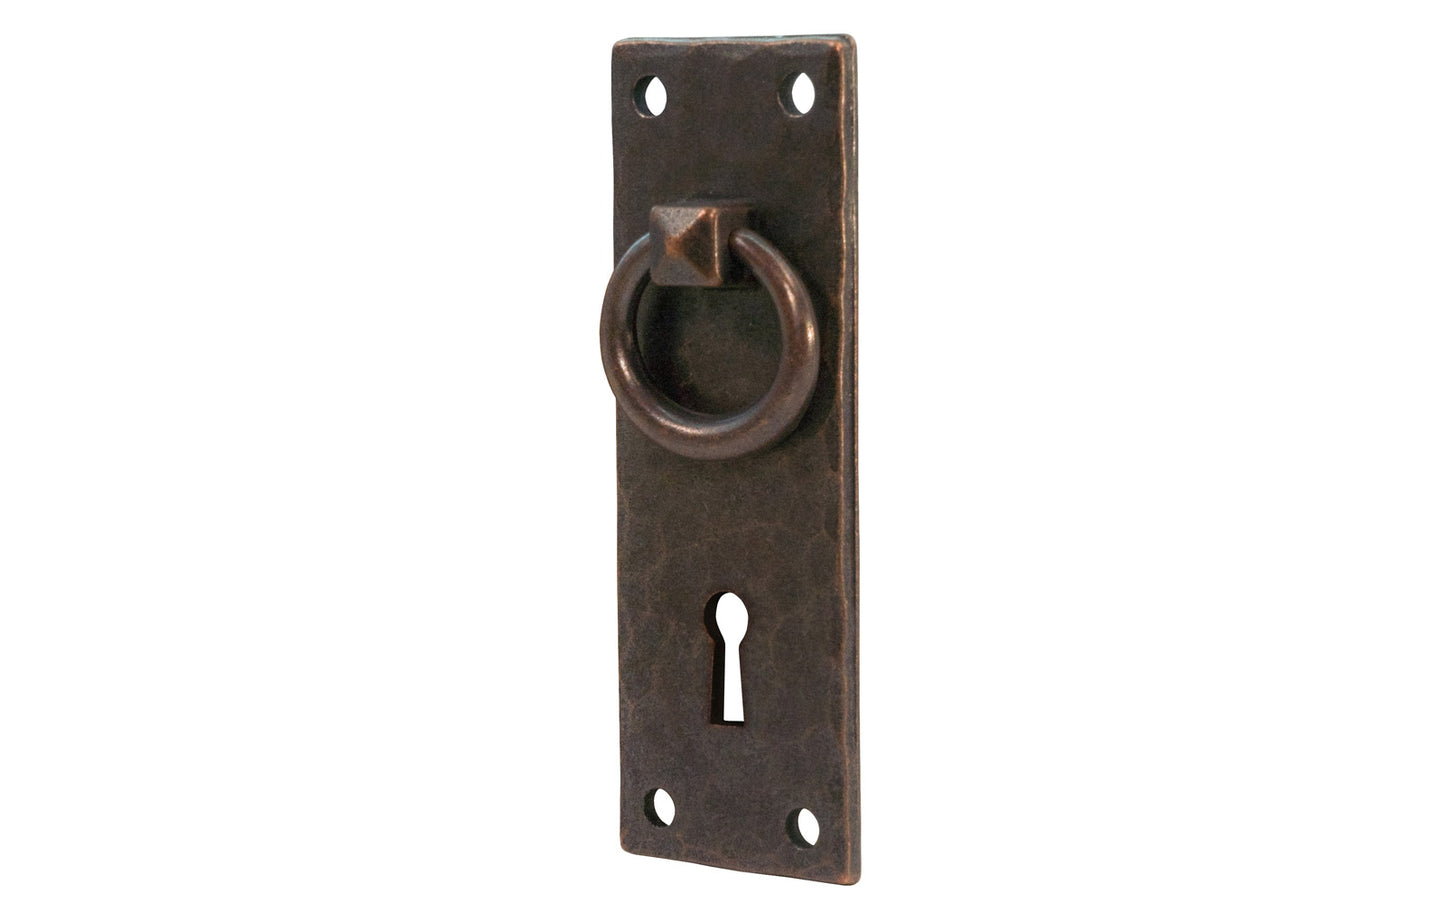 Vintage-style Hardware · Solid Brass Hammered Ring Drop Pull with keyhole. Designed in the Mission or Arts & Crafts style, Gustav Stickley style hardware. Rustic hammered drop pull. Antique copper finish. Round-head slotted screws. Thick solid brass drop pull plate. 4" high x 1-3/8" wide plate. Reproduction hardware.